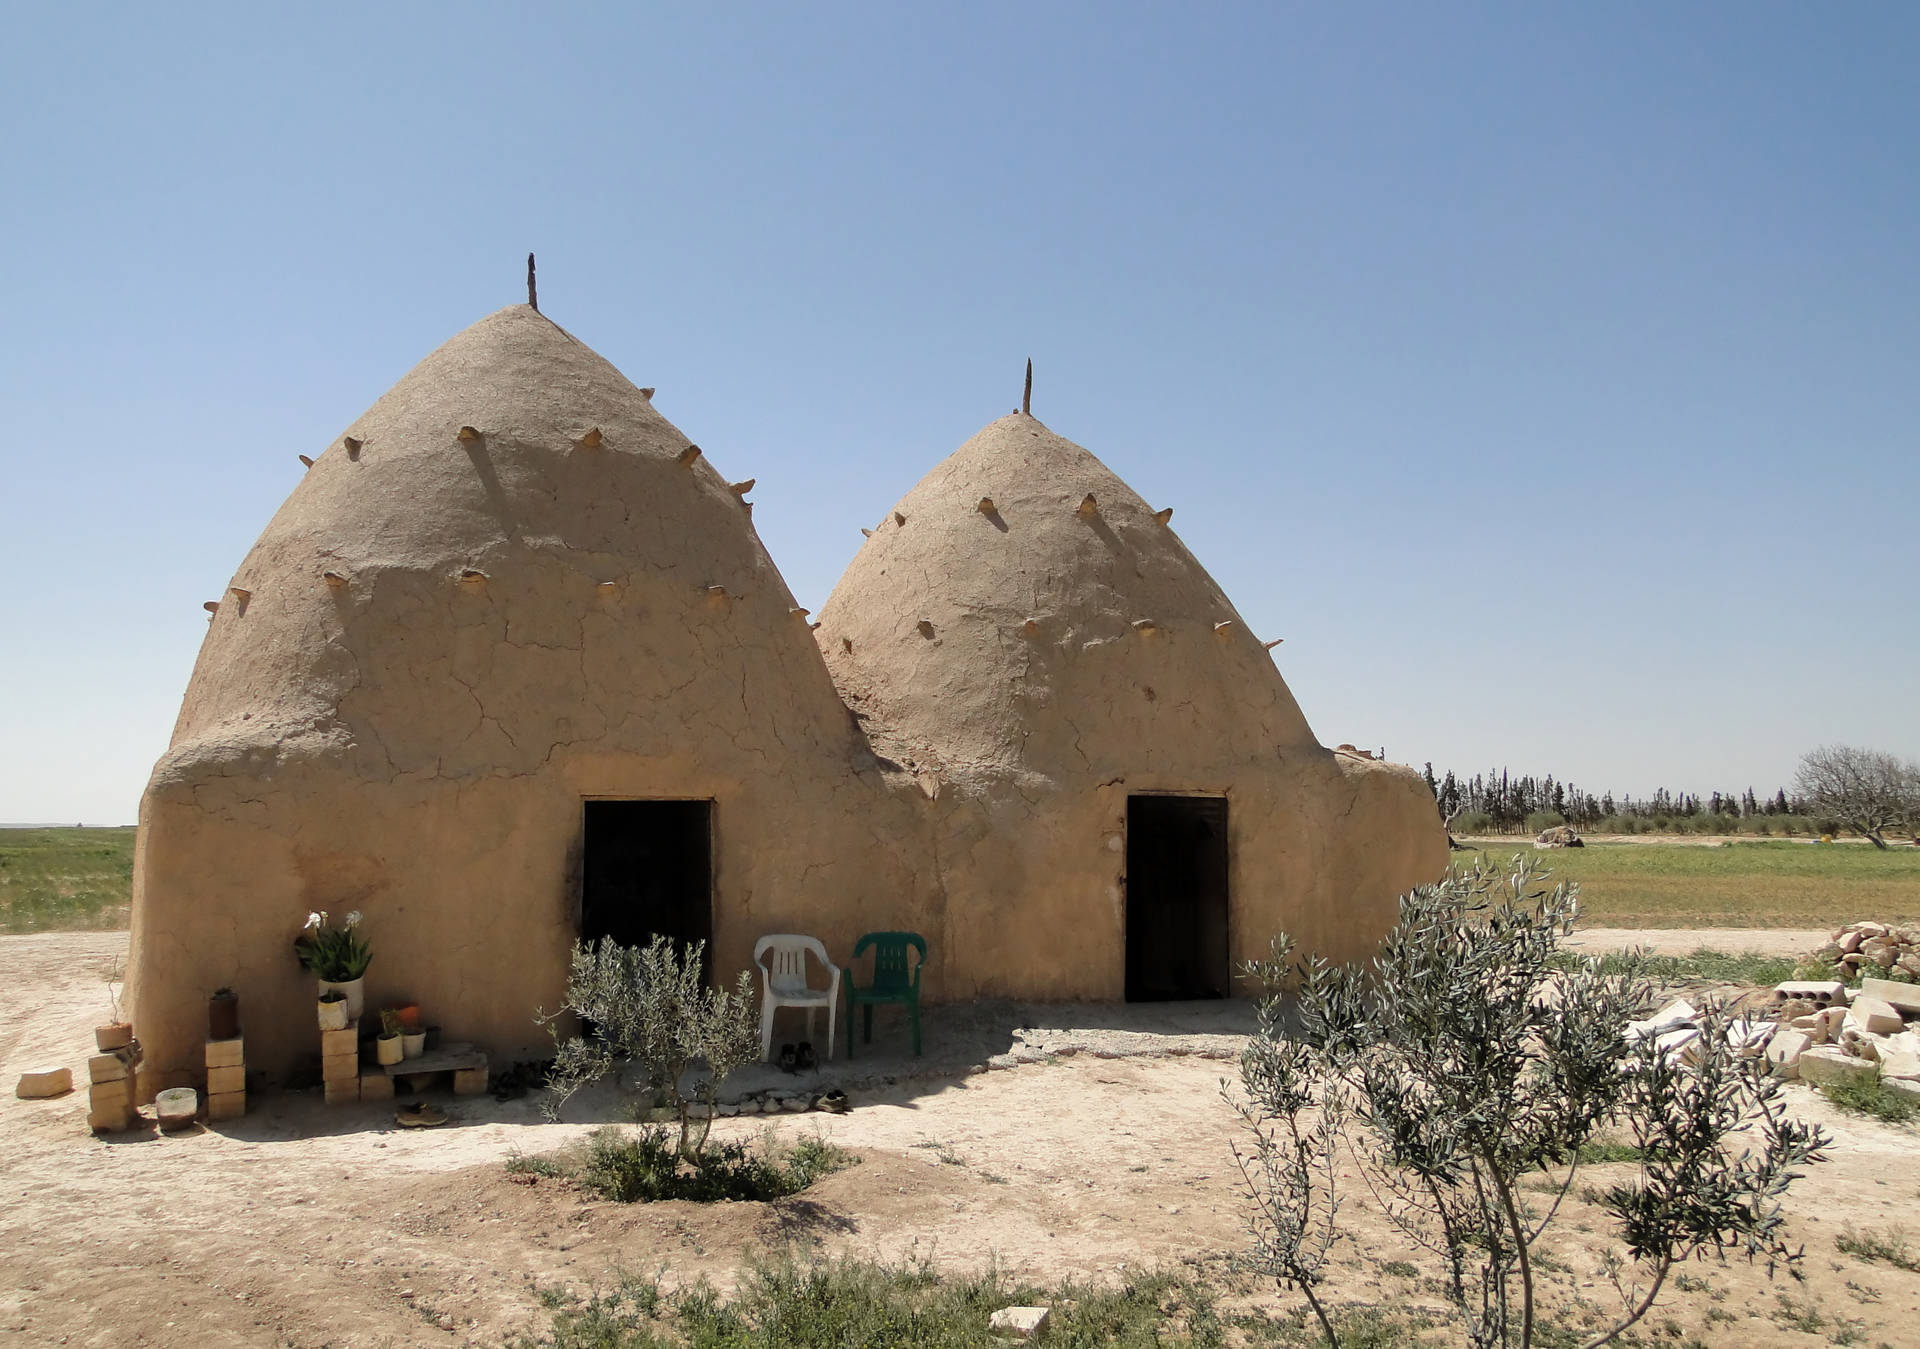 Syria Beehive Houses Wallpaper